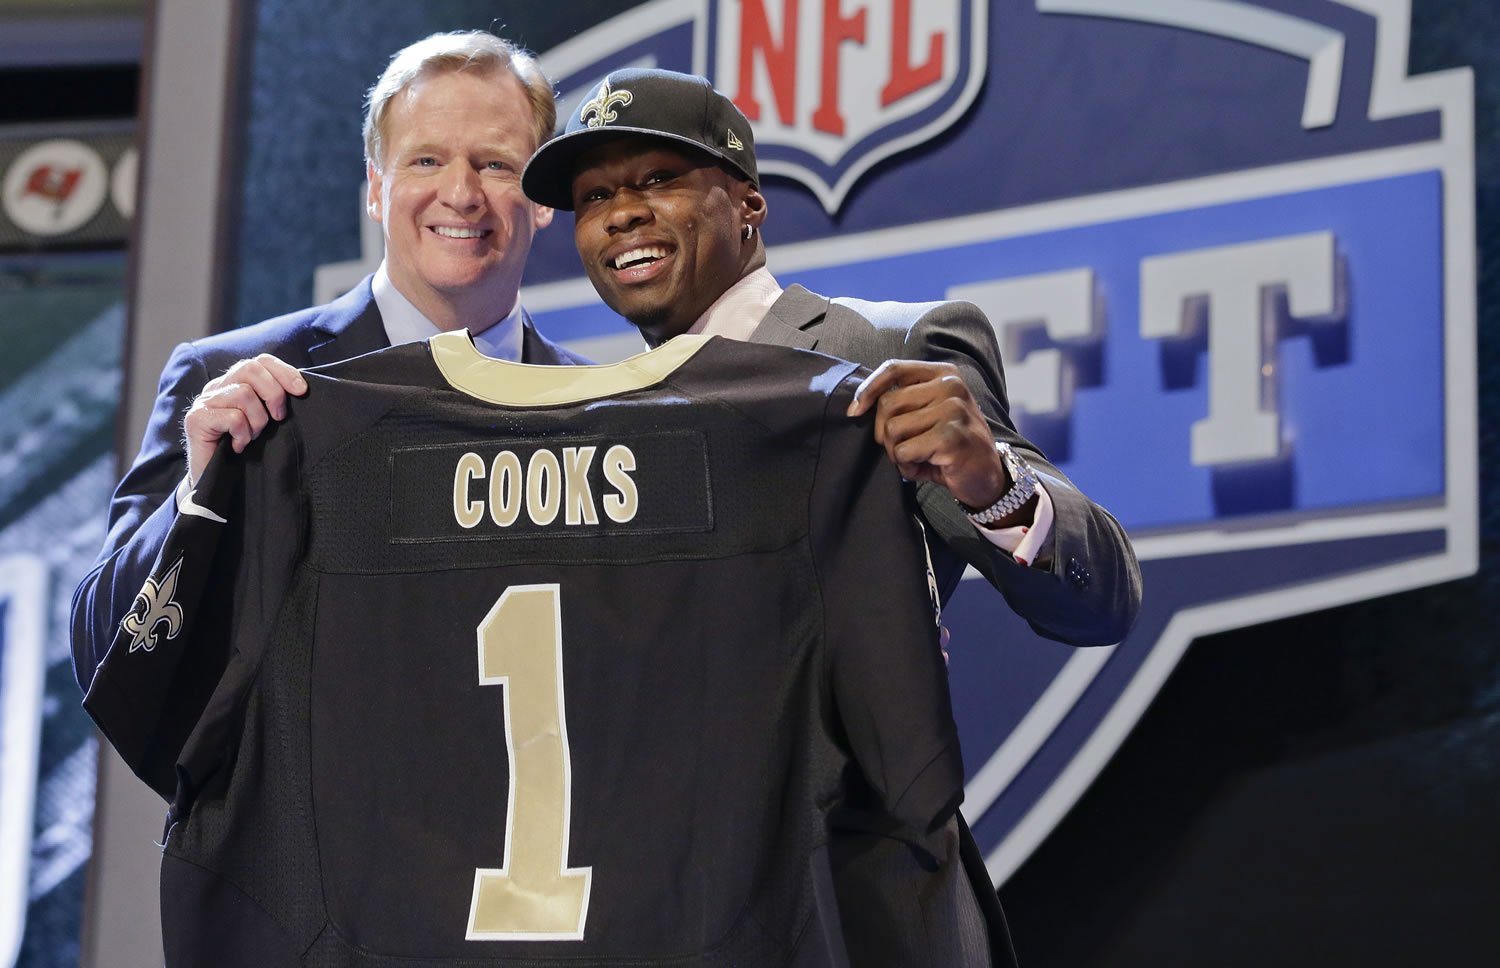 Oregon State wide receiver Brandon Cooks poses with NFL commissioner Roger Goodell after being selected by the New Orleans Saints as the 20th pick the first round of the 2014 NFL Draft, Thursday.